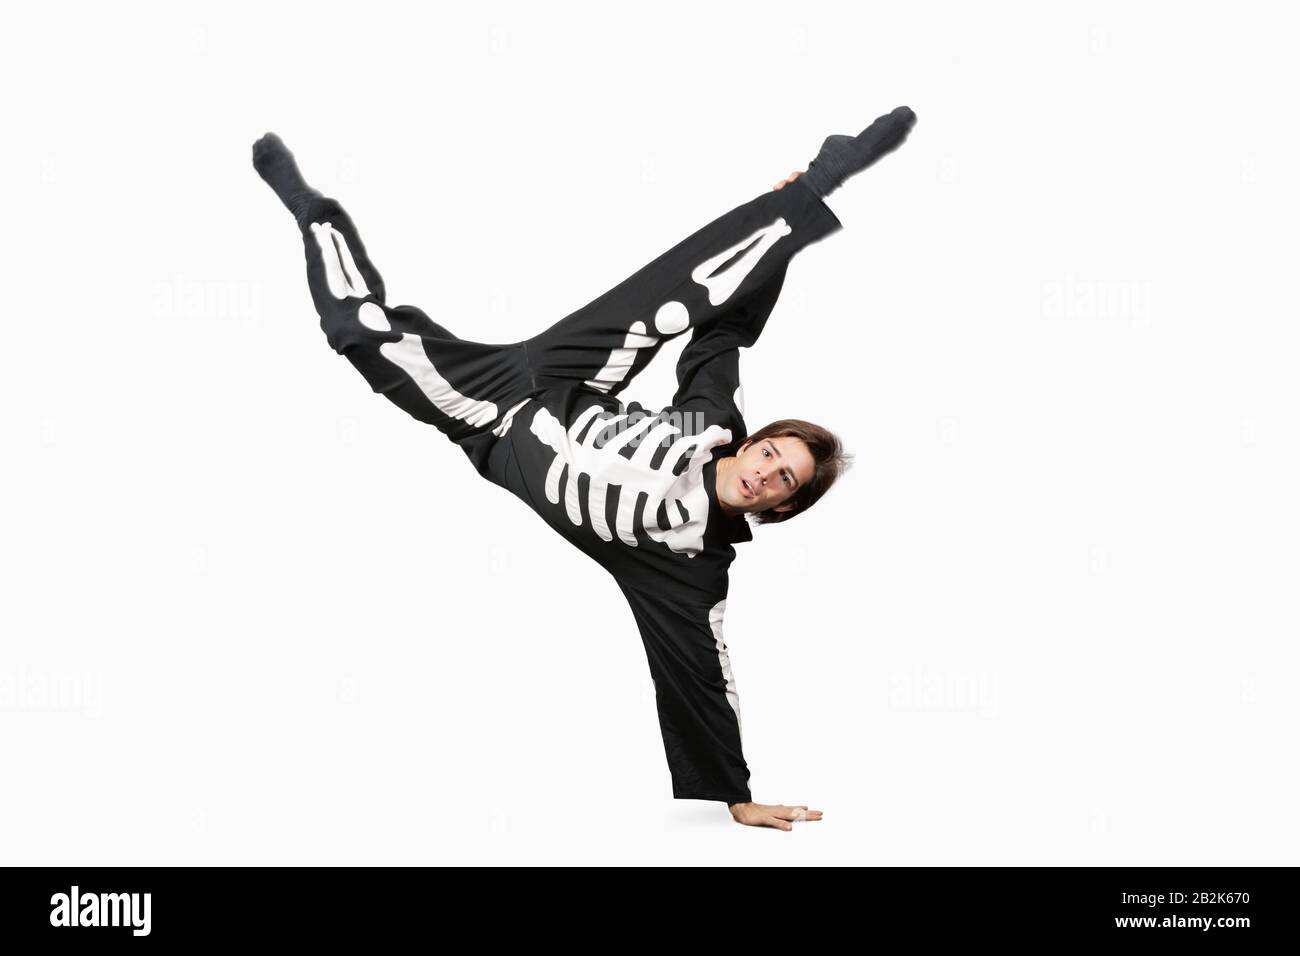 Young man in skeleton costume break dancing against white background Stock Photo